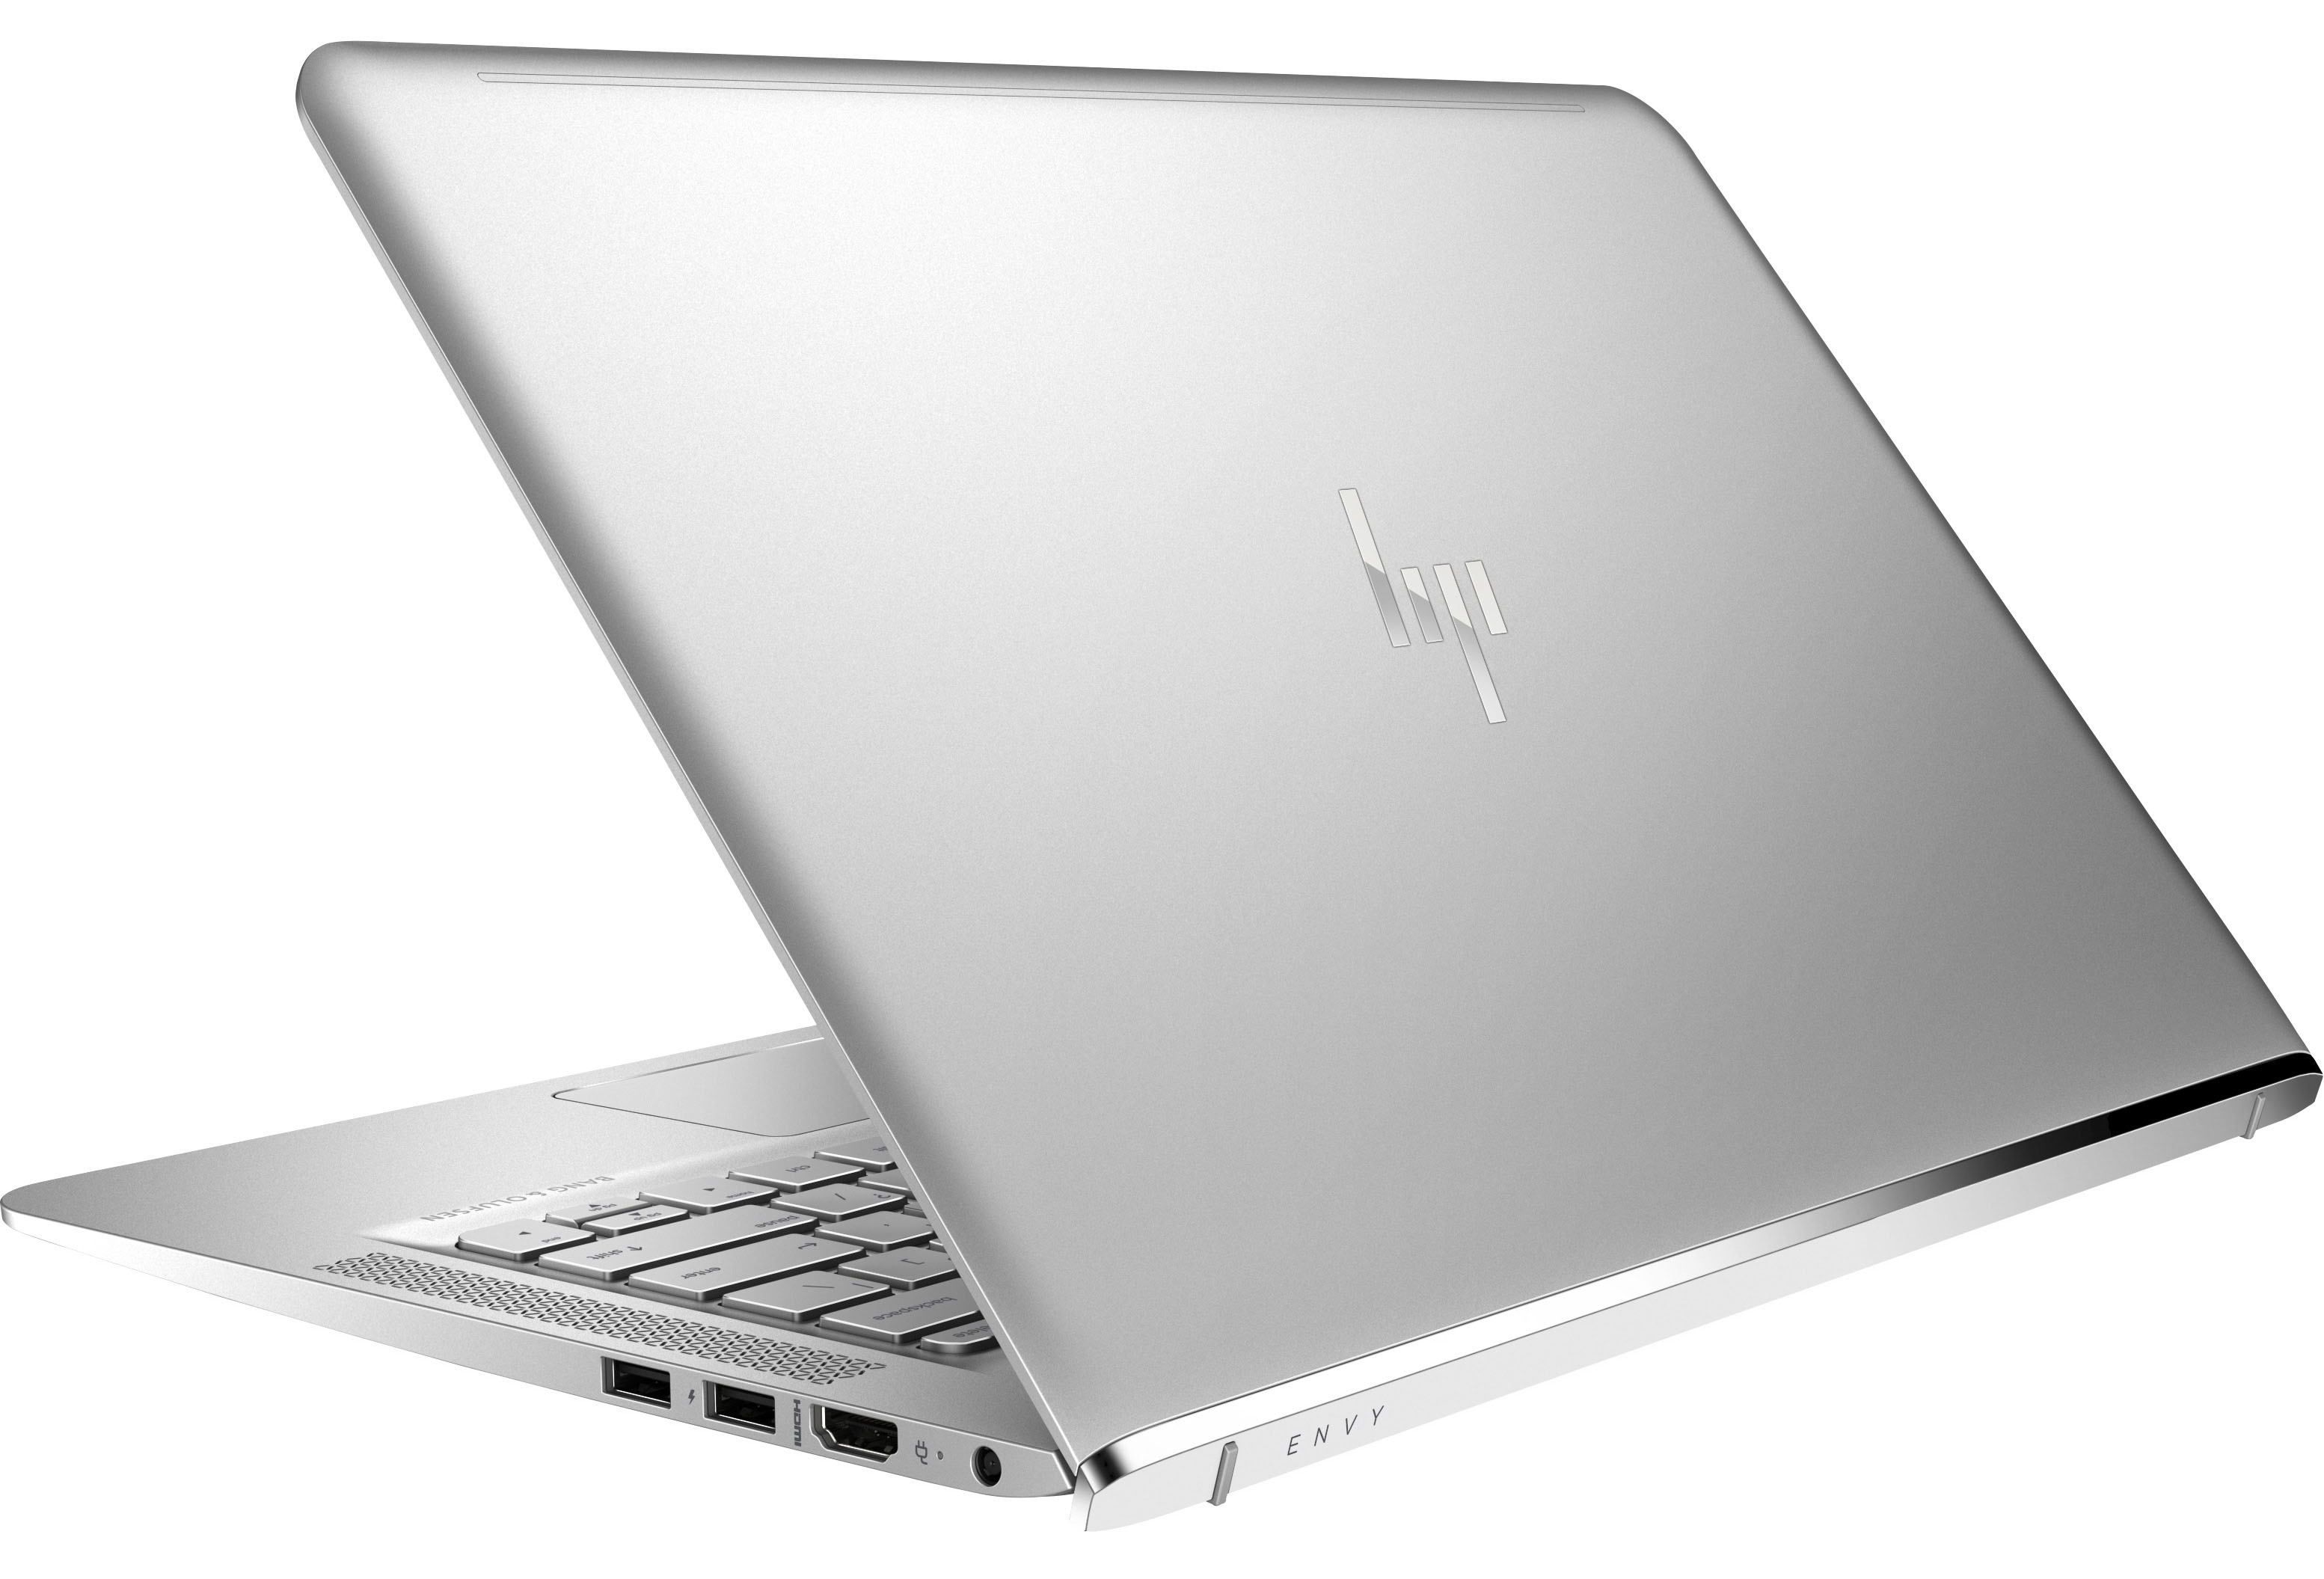 ENVY 13-ab000 Notebook PC